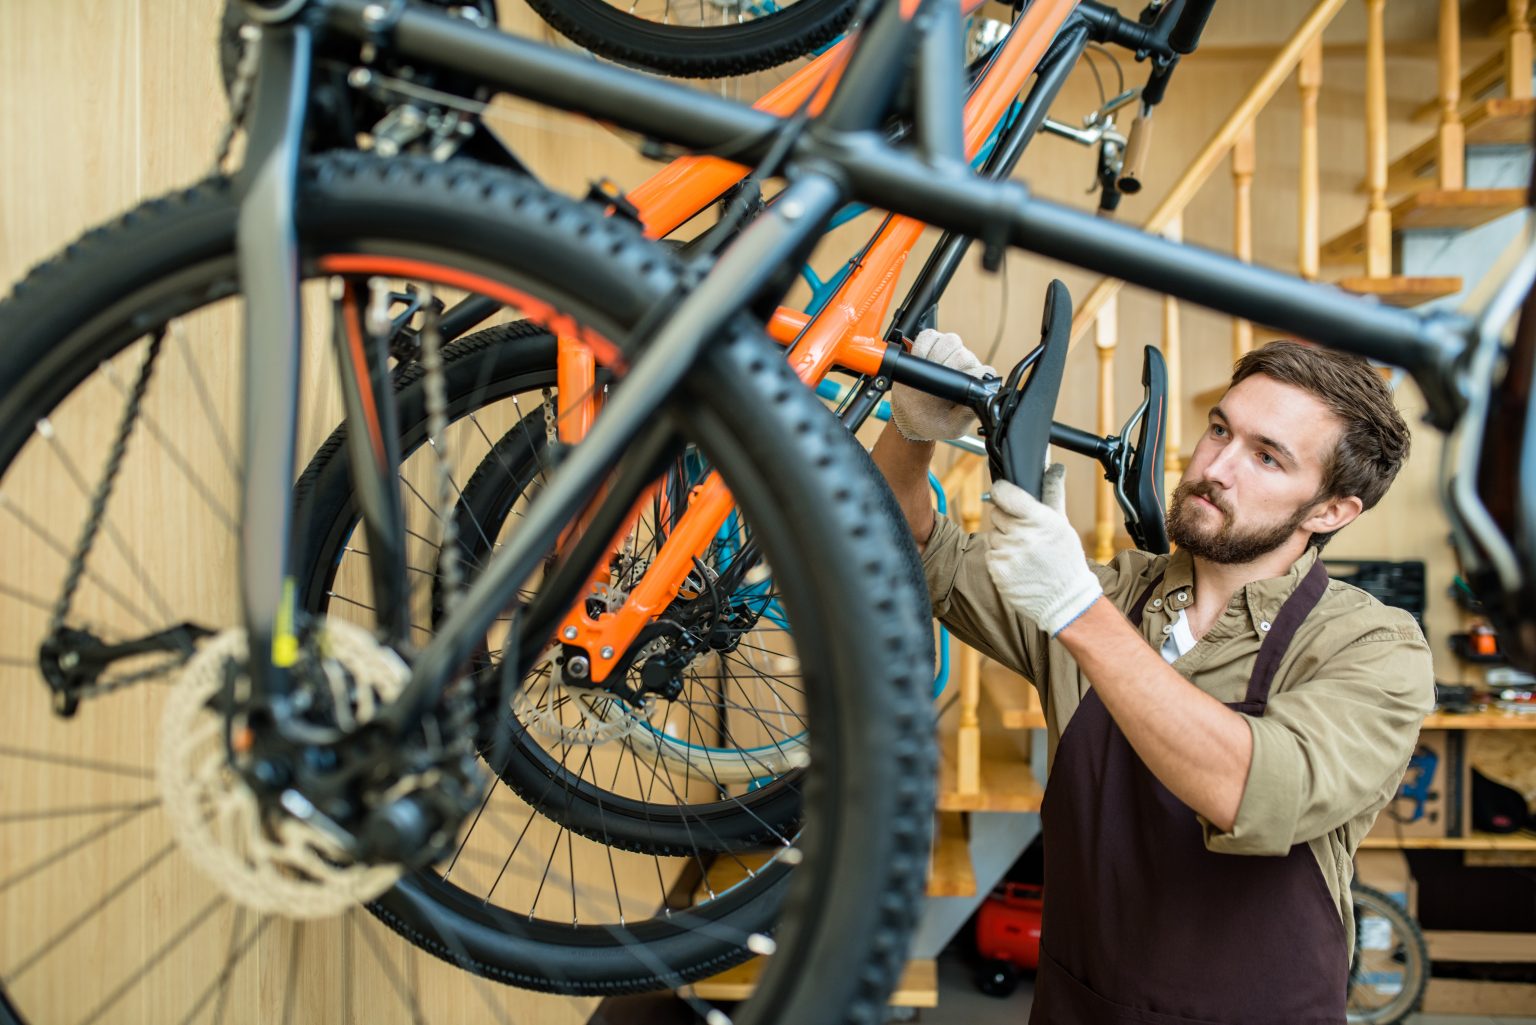 We tell you the 9 ways that cyclists have to troll a bicycle shop ... - Storyblocks Waist Up Portrait Of ConcentrateD Young Mechanic In Apron ADjusting SaDDle Height While Working At MoDern Bicycle Repair Shop RpQmQTQbM 1 1536x1025